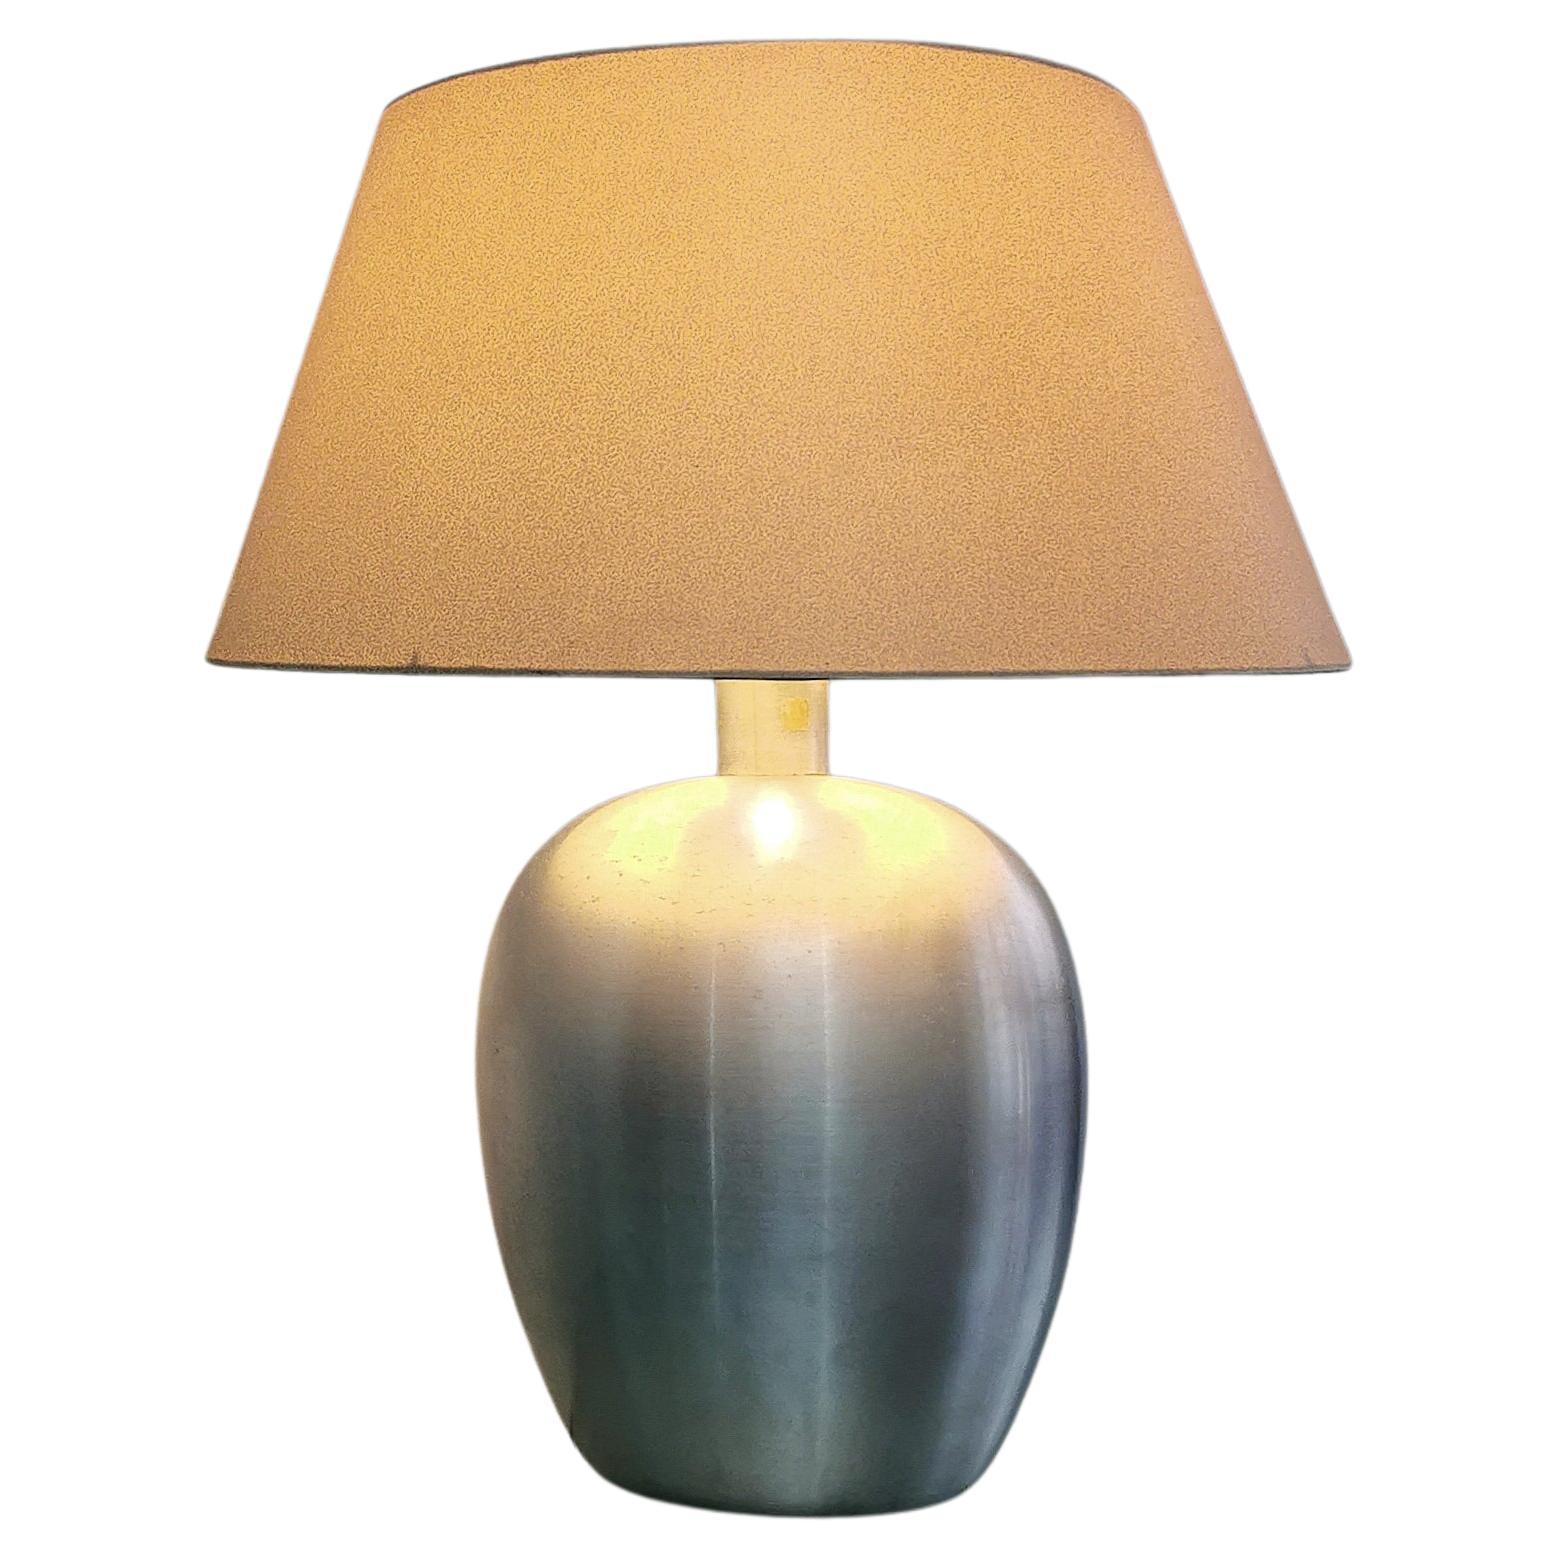 Table lamp with 1 light E27 produced in Italy in the 70s. The lamp was made of brushed aluminum with fabric lampshade.

Lampshade measurements: Height 25.5 cm. Diameter 50 cm.
Aluminum structure measurements: Height 40.5 cm. Diameter 25.5 cm.
Total